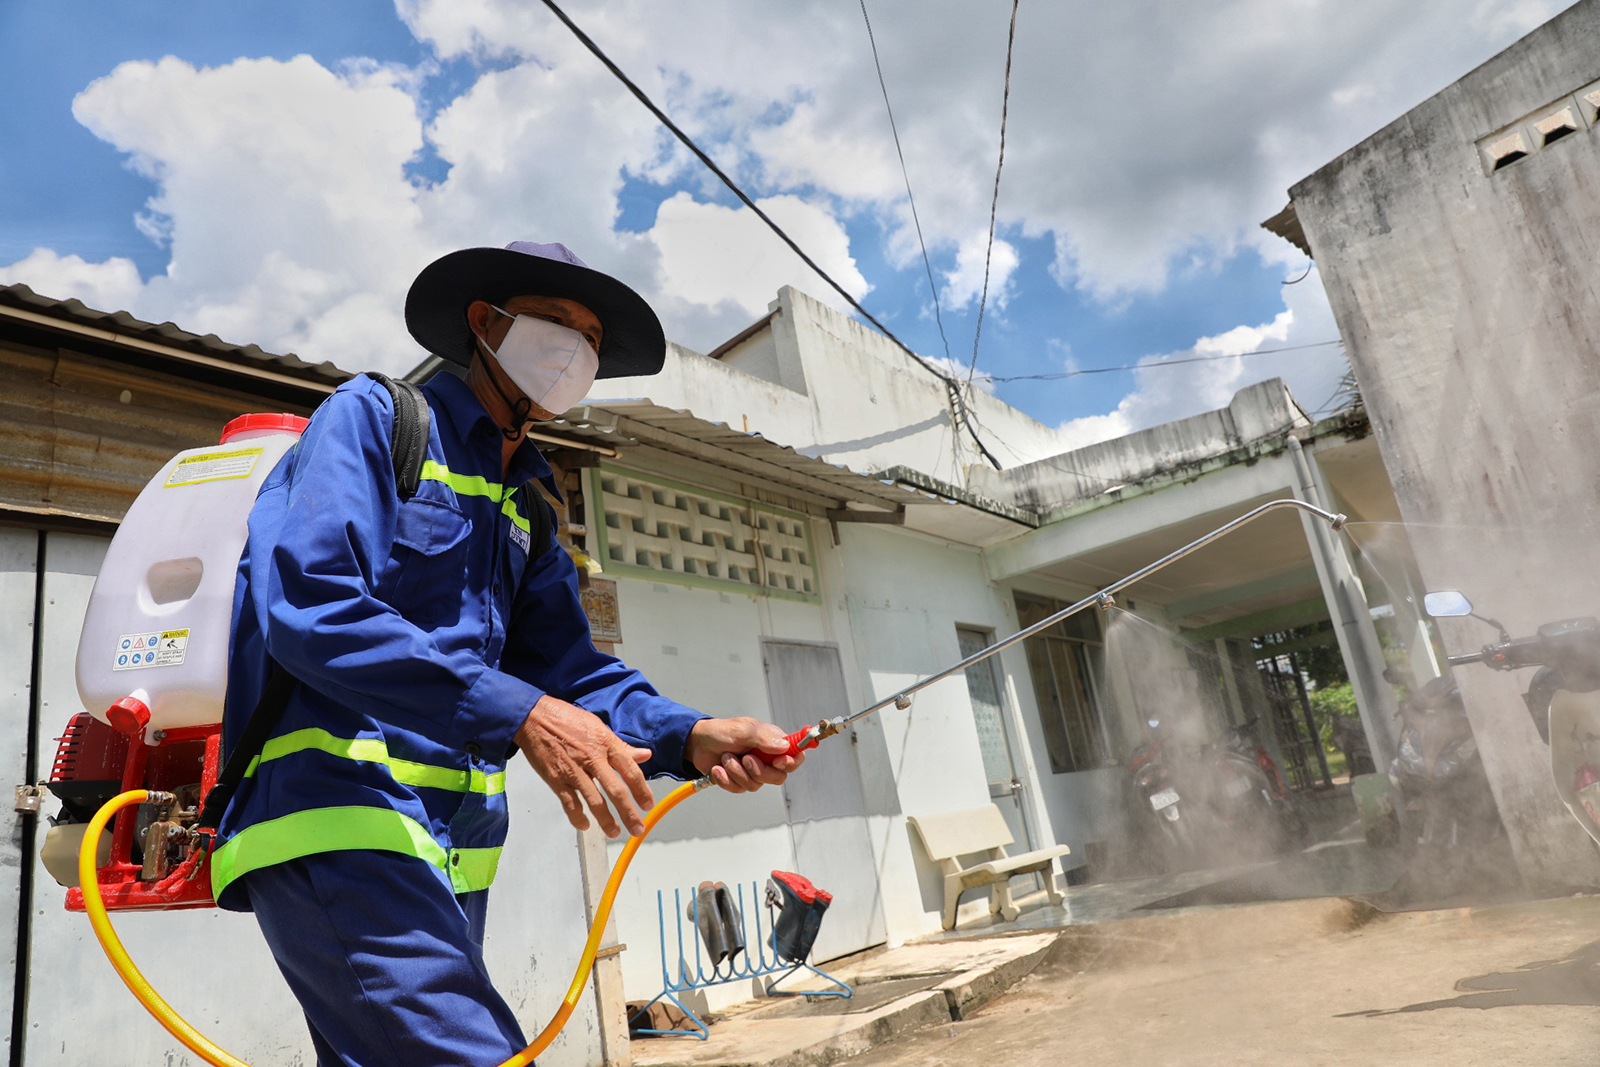 A worker disinfects a section of the Dong Thanh landfill in Cu Chi District, Ho Chi Minh City where the pigs are stored. Photo: Tuoi Tre